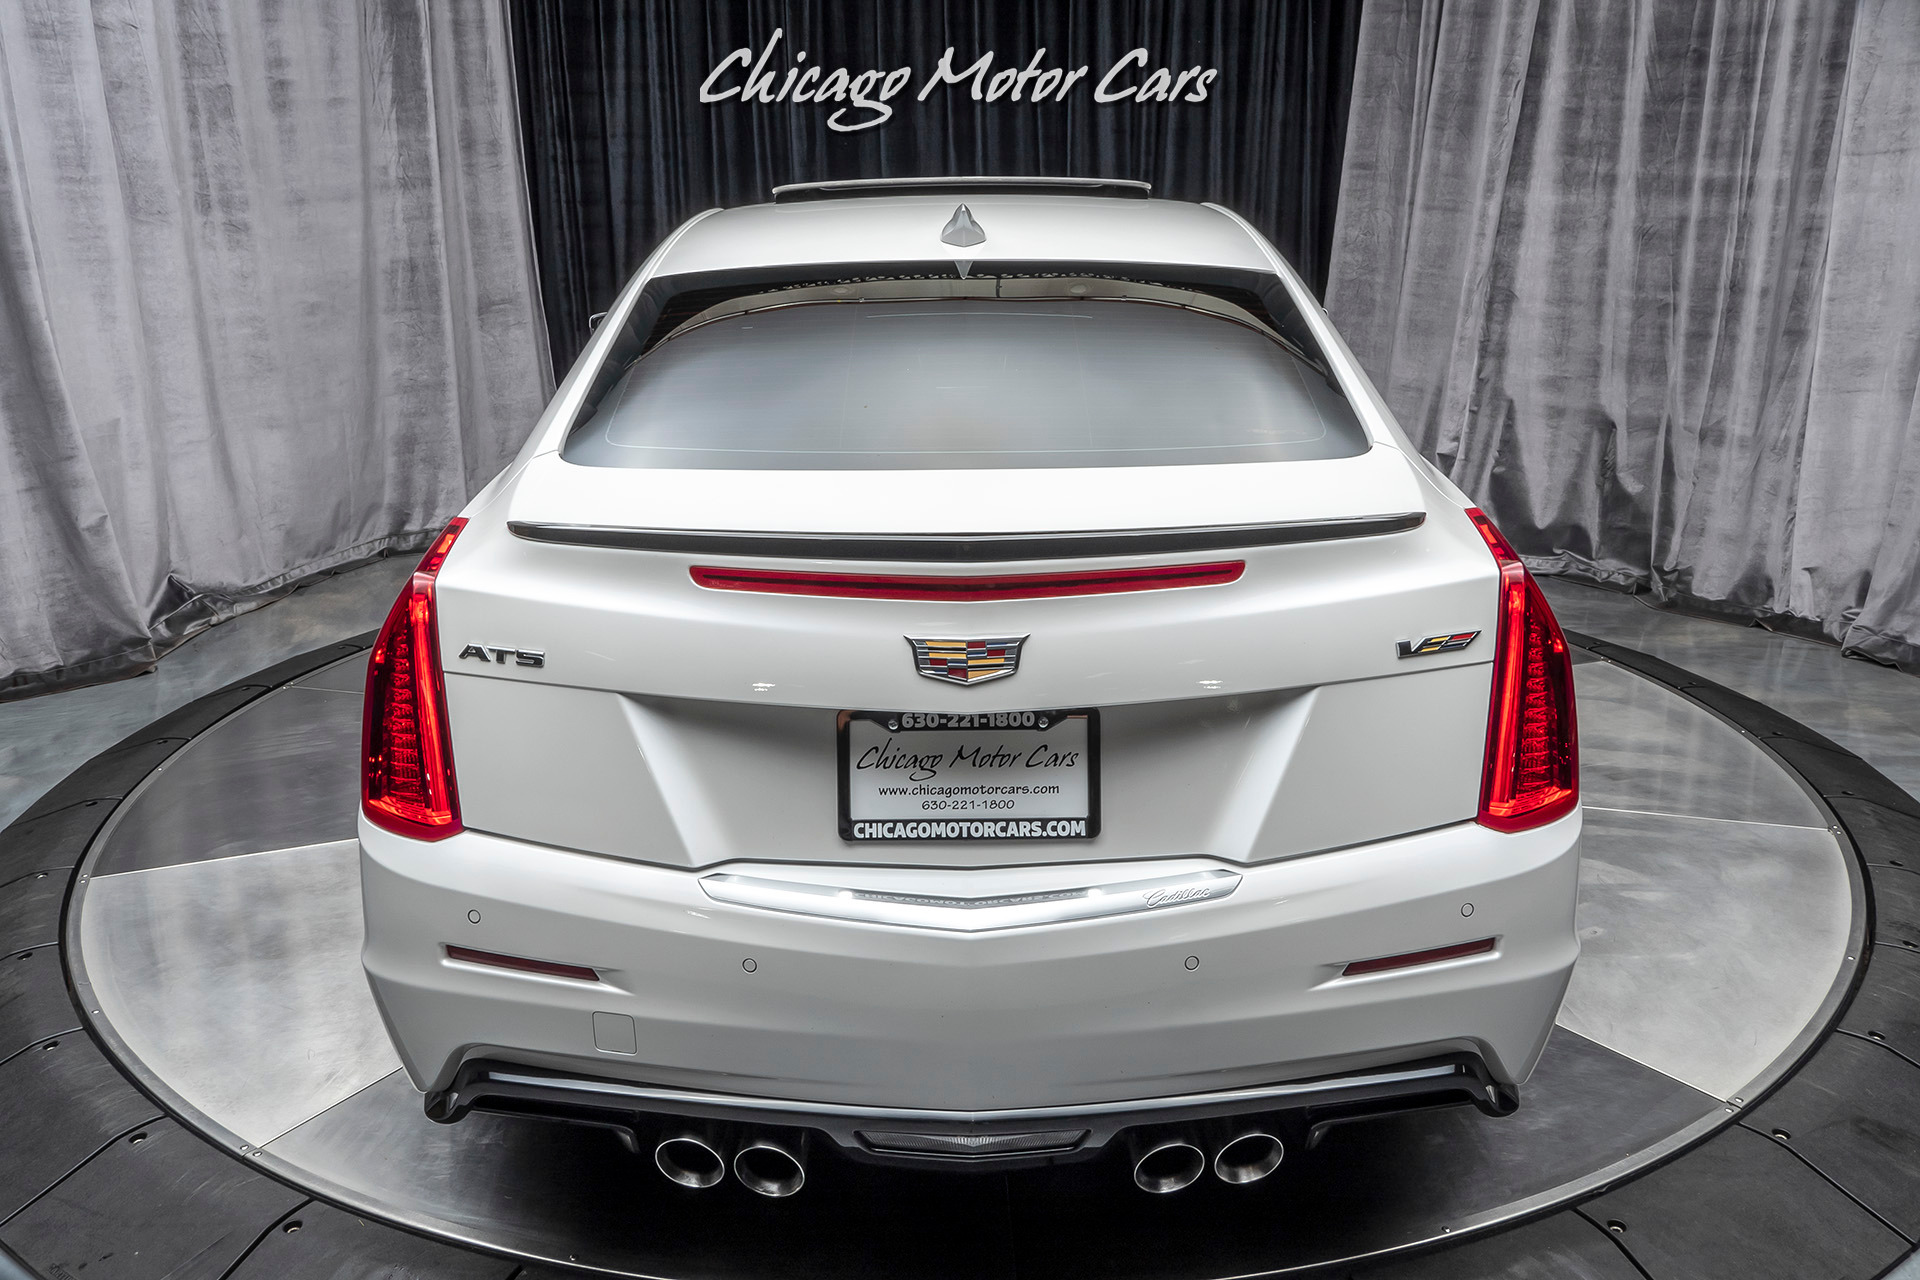 Used-2016-Cadillac-ATS-V-Coupe-600-HORSEPOWER-6-Speed-Manual-ONE-OWNER